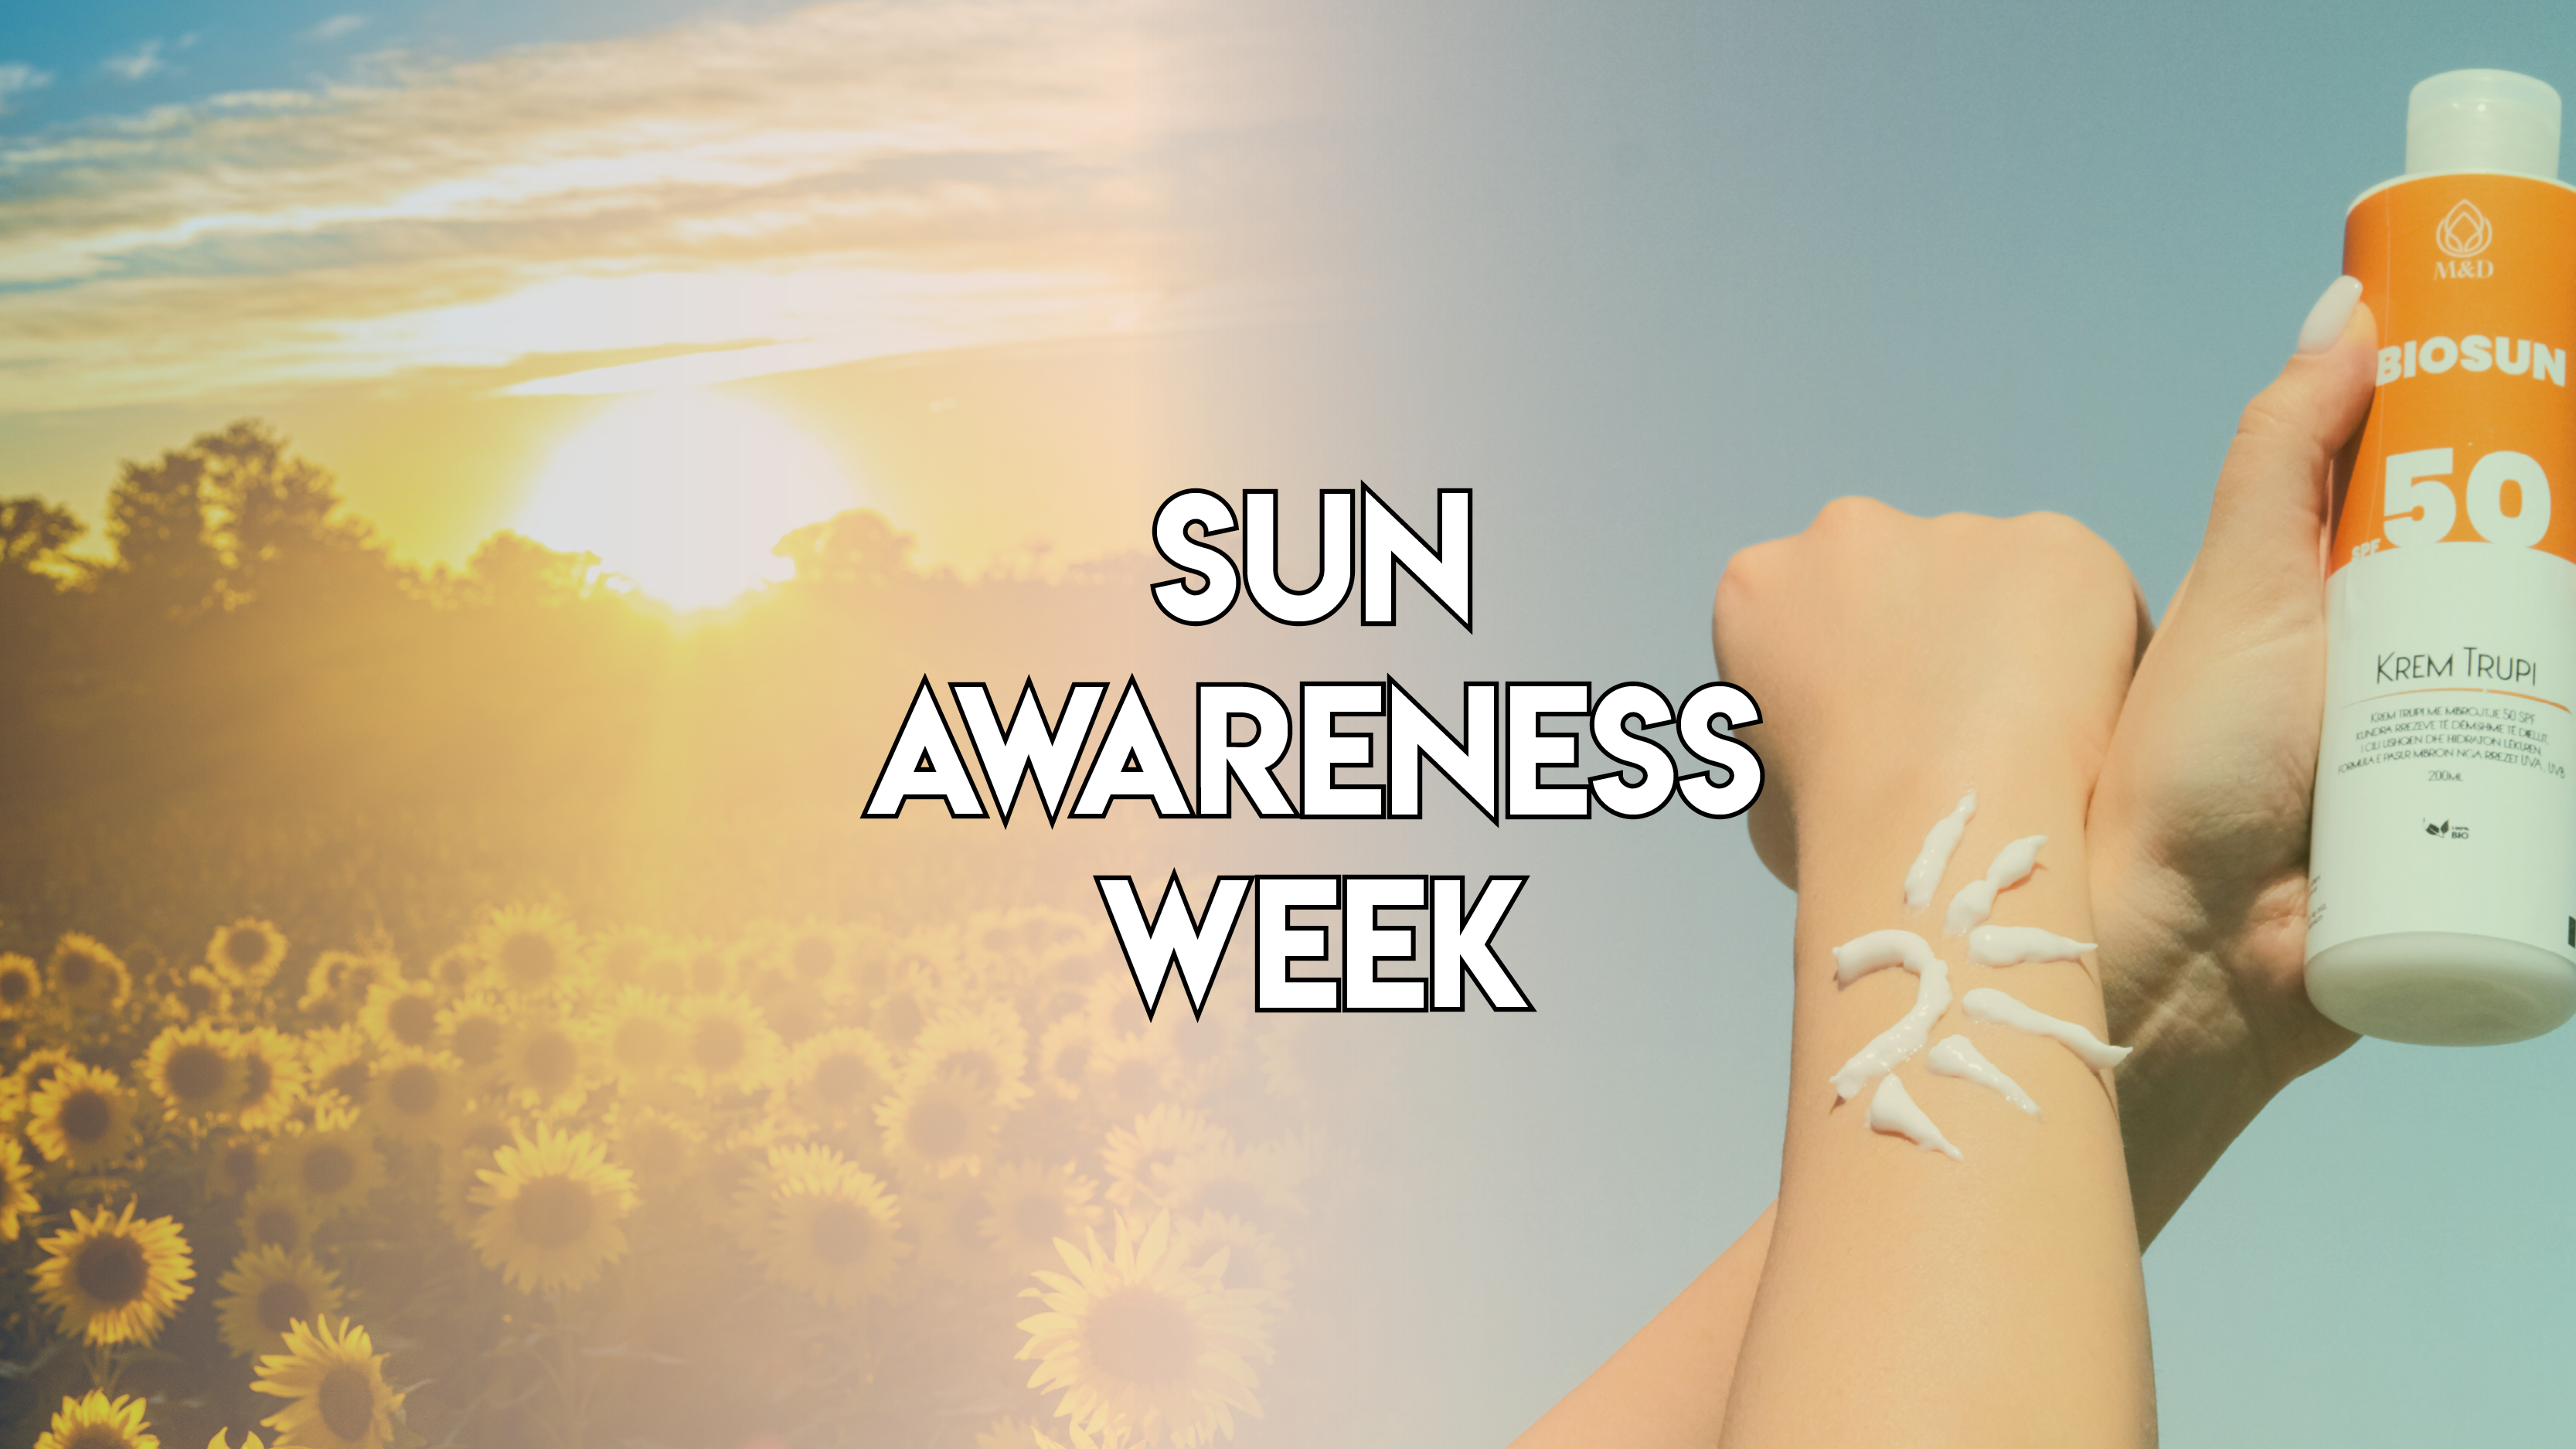 Sun Awareness Week: Stay safe and know the signs of skin cancer